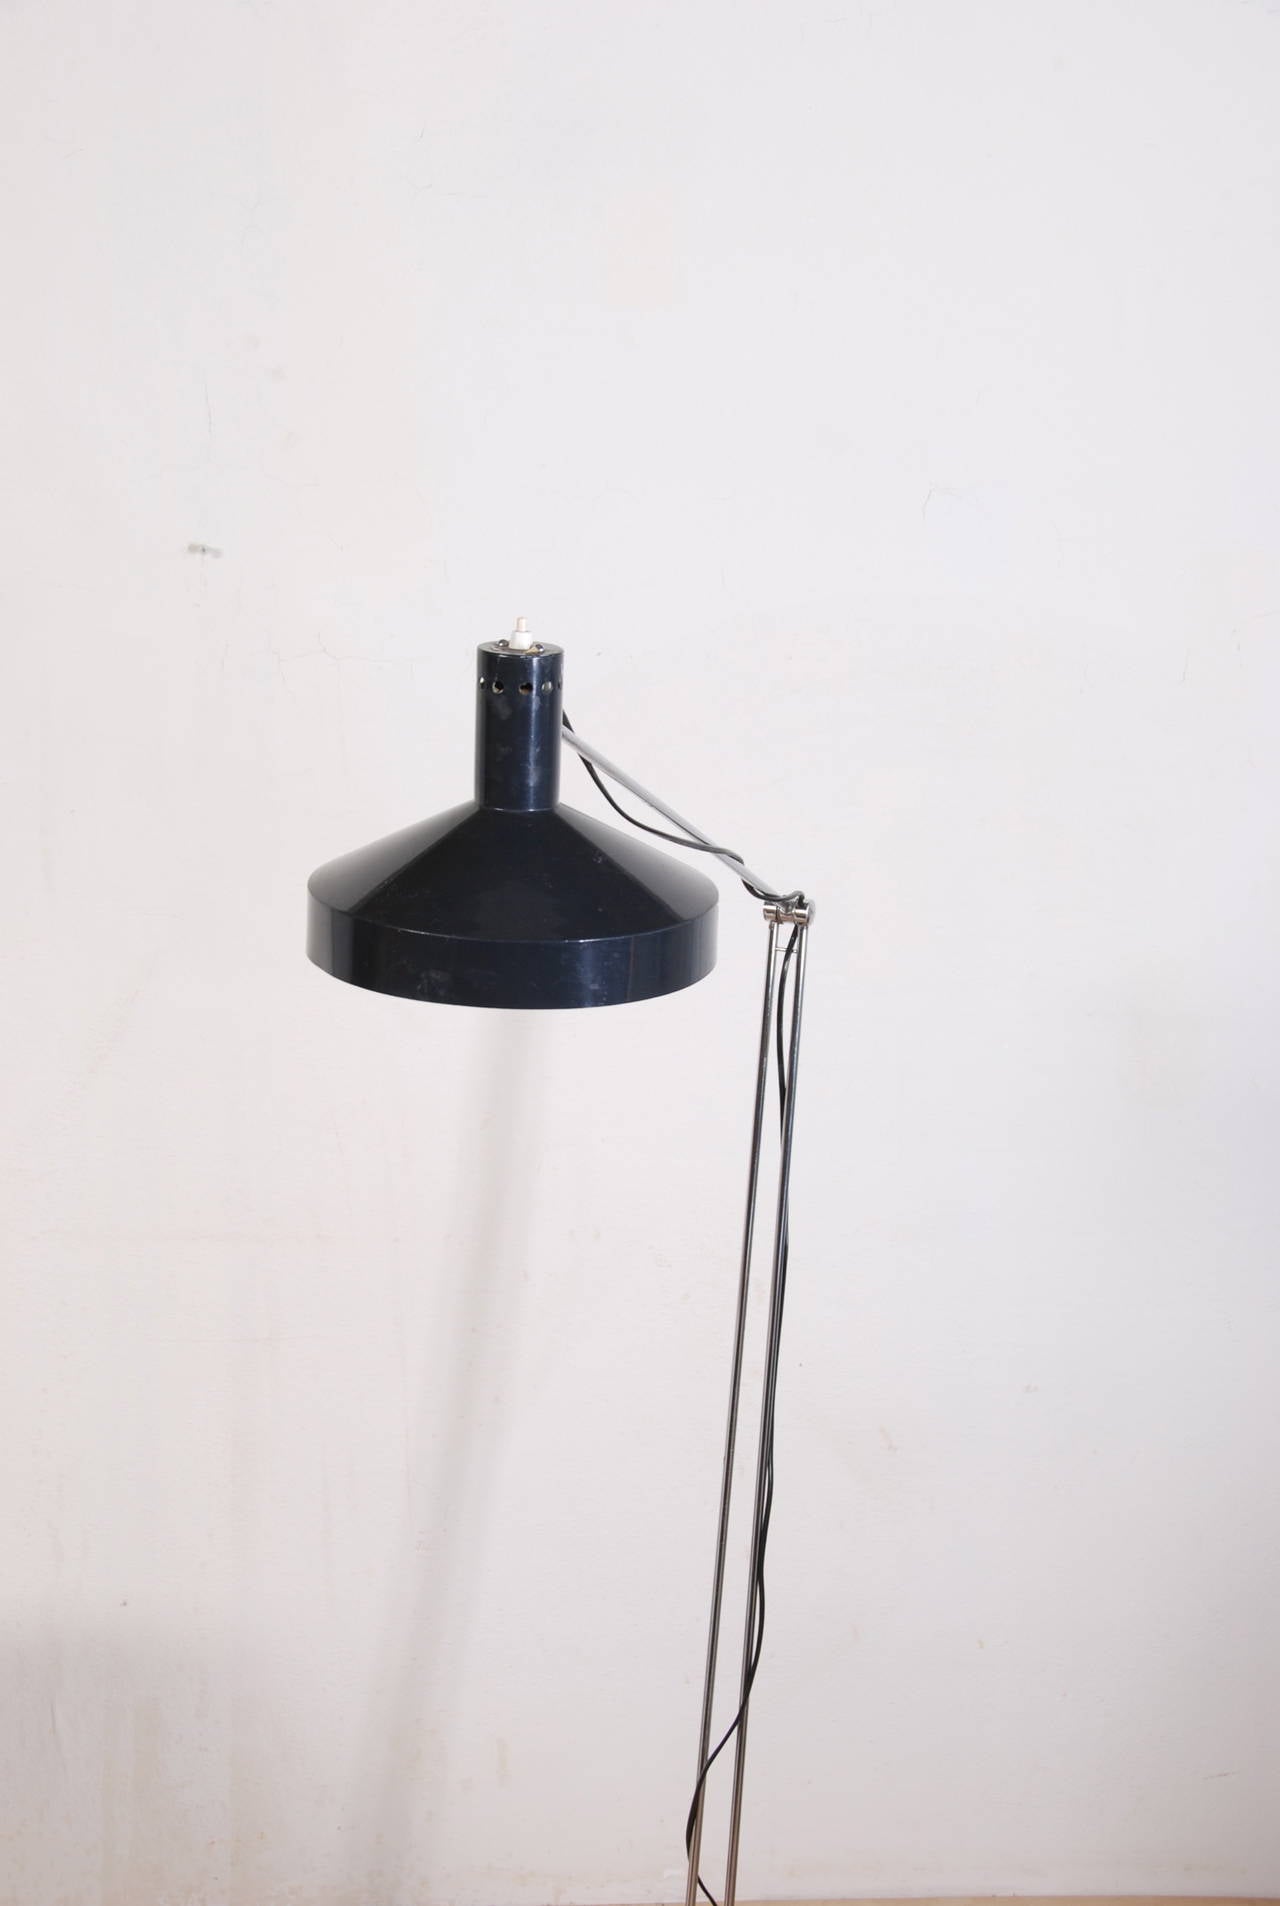 Mid-20th Century Articulated Floor Lamp by Rosemarie & Rico Baltensweiler, Switzerland For Sale